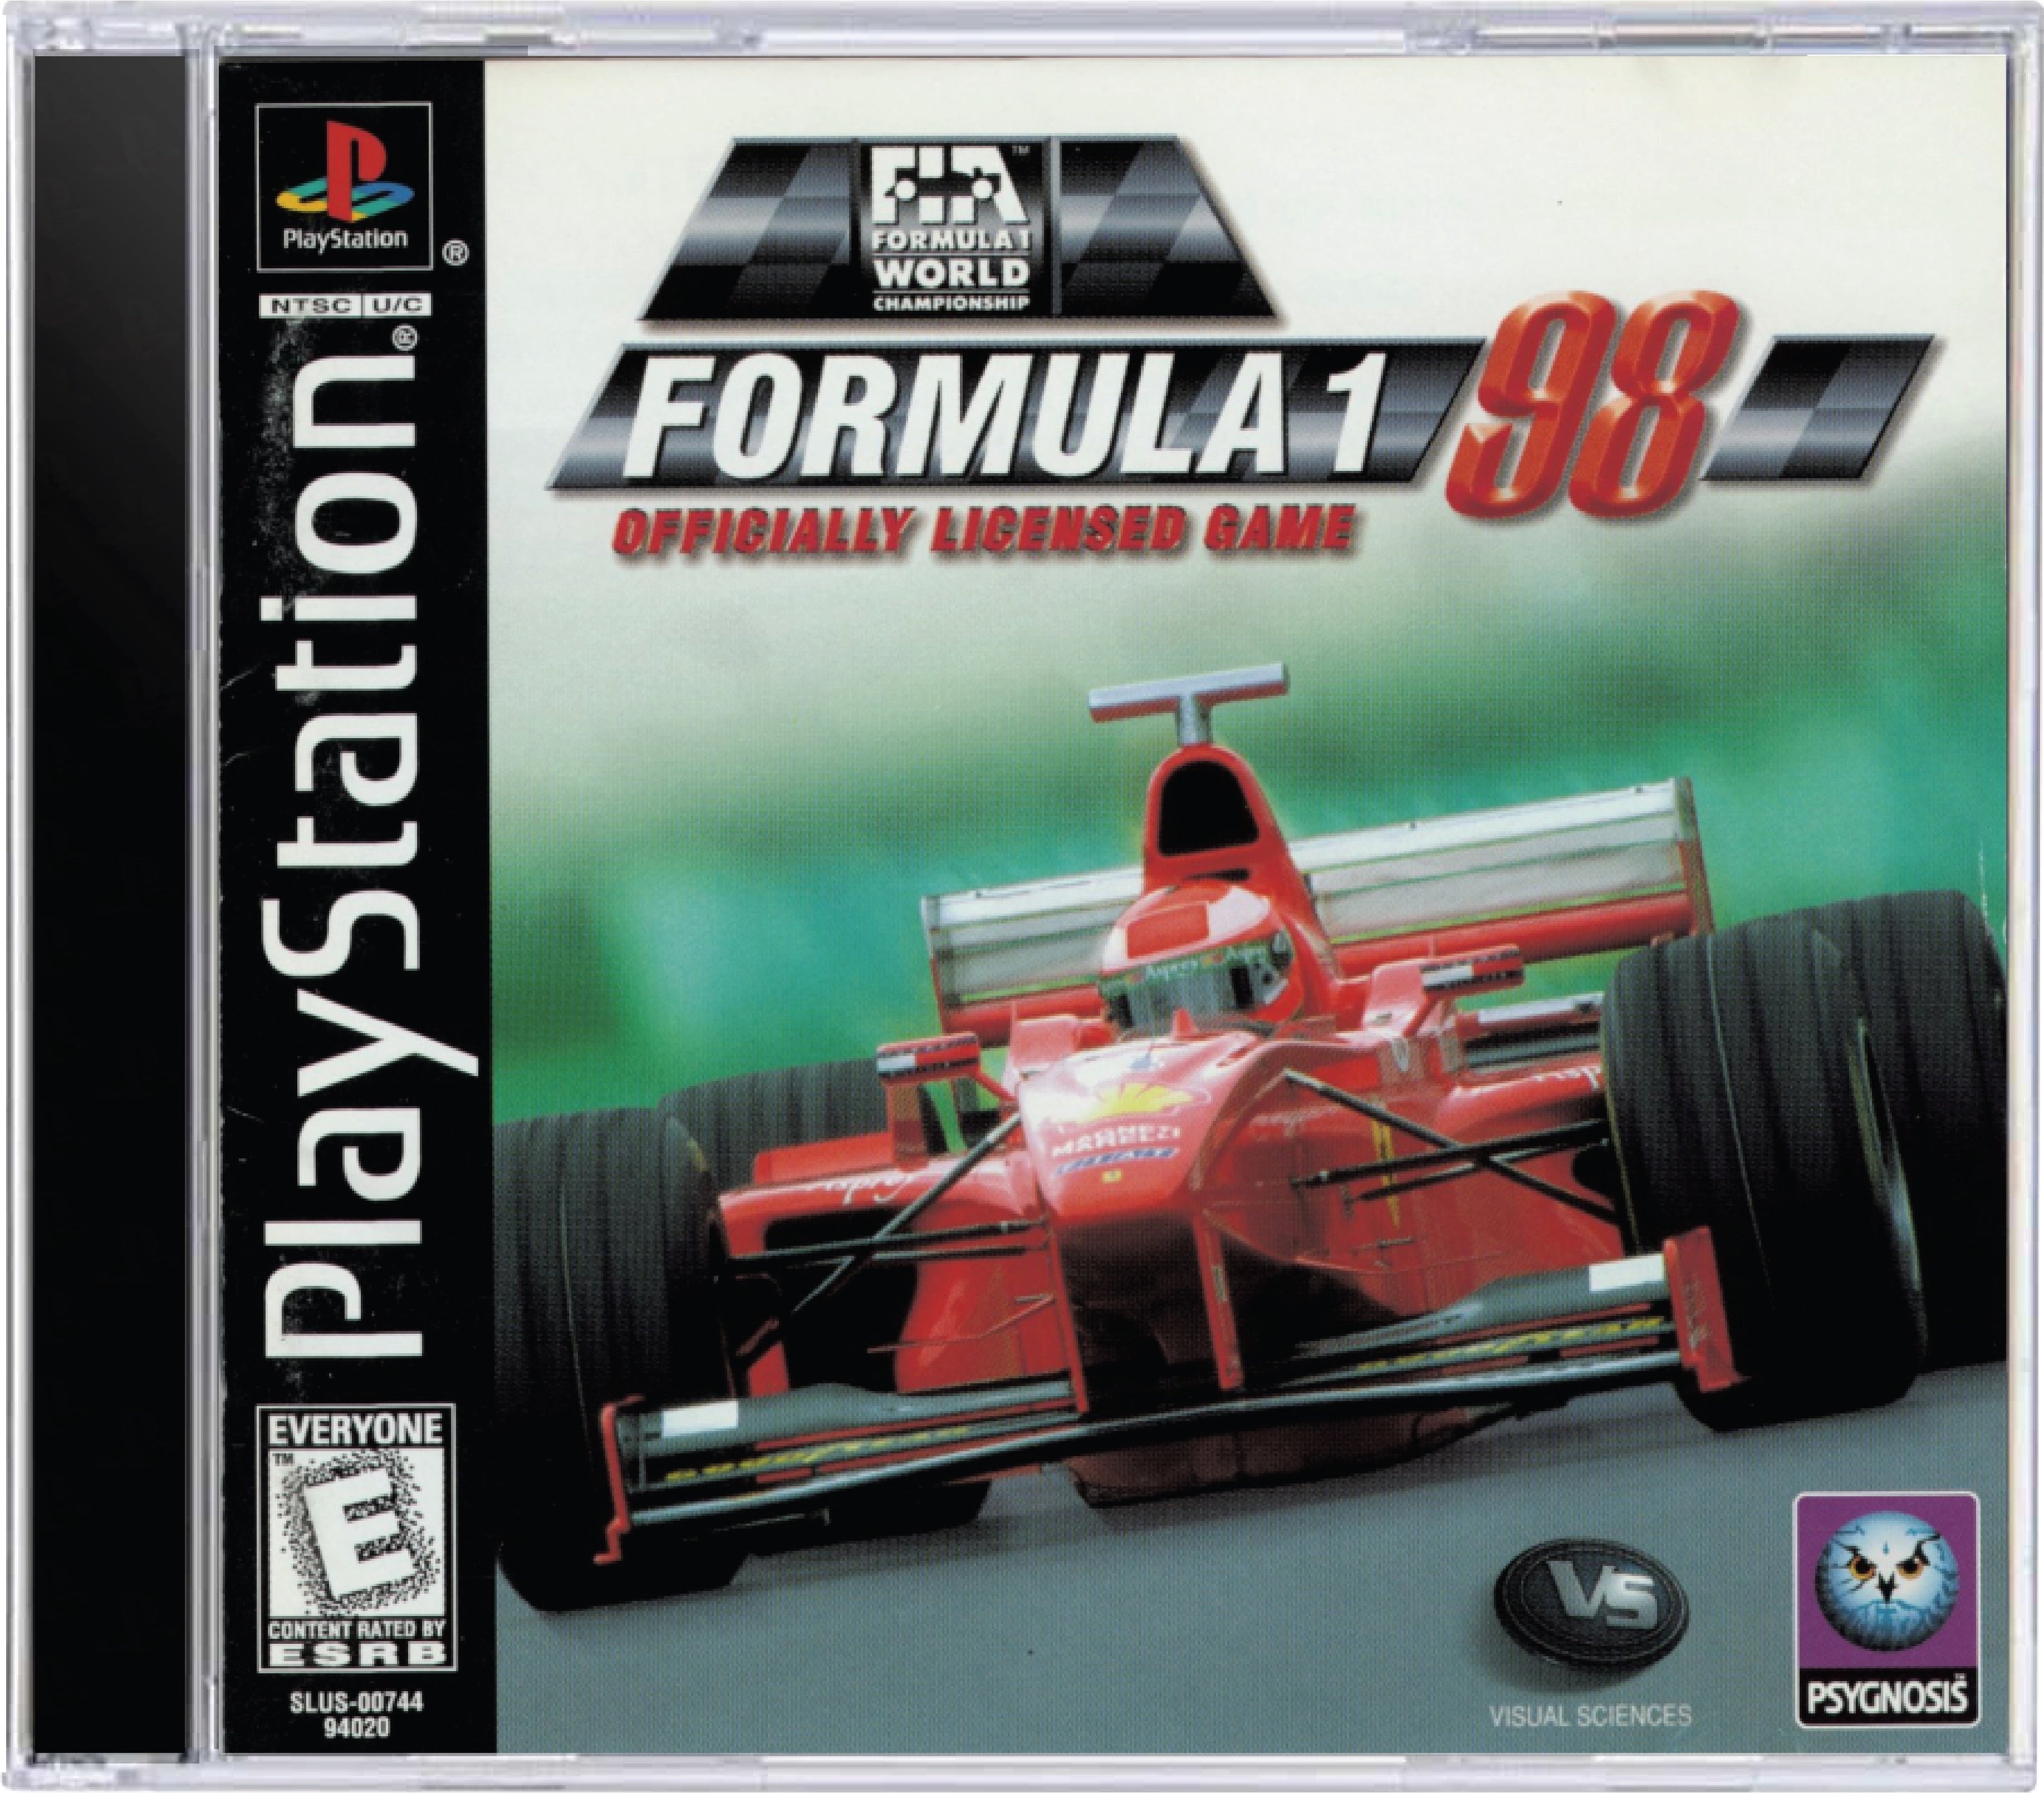 Formula 1 98 Cover Art and Product Photo